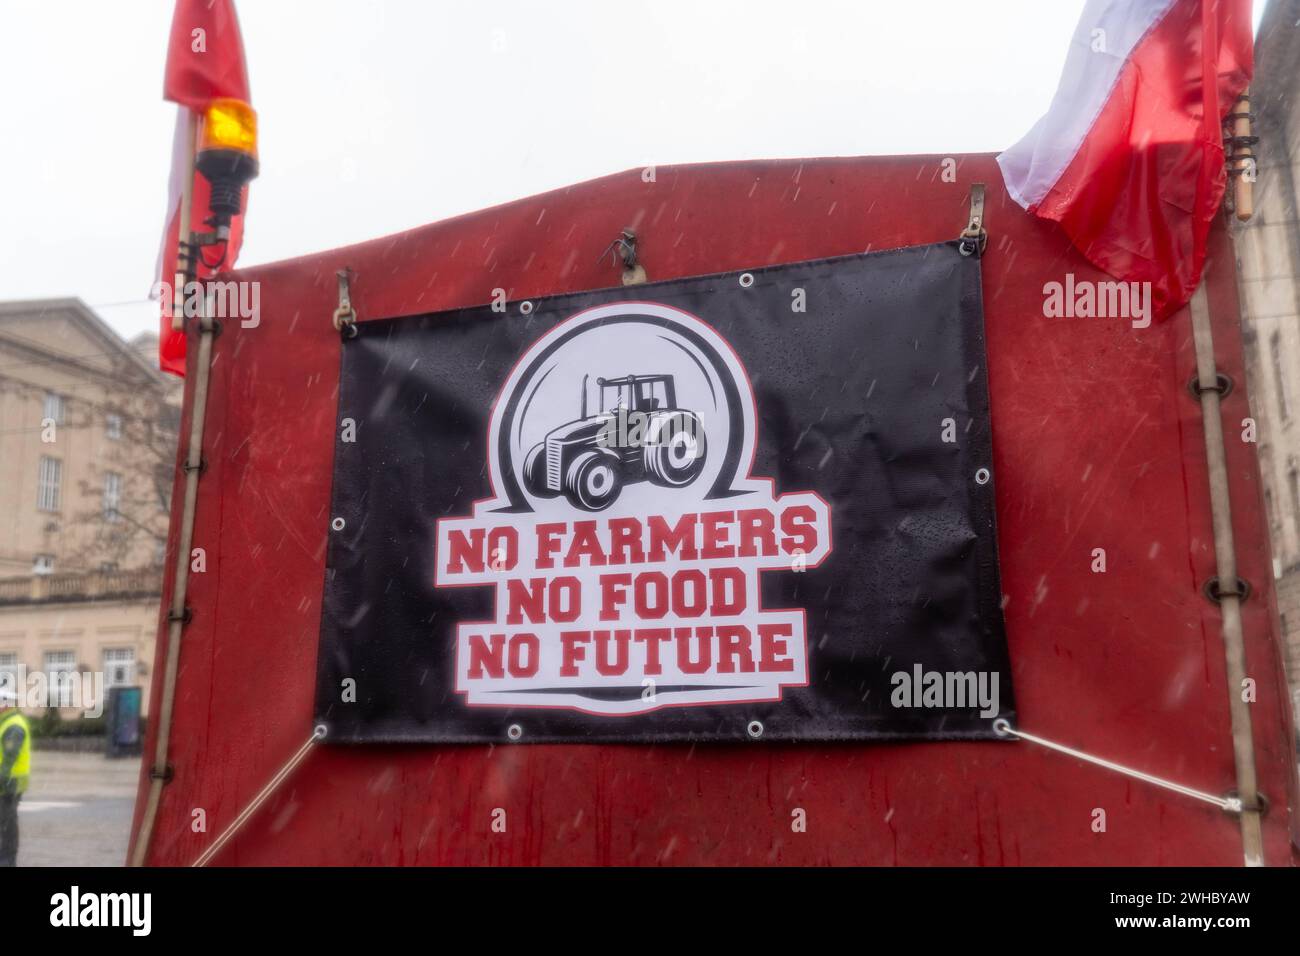 a No farmers no food no future banner is attached to a tractor during a farmers protest during a protest against the flow of agricultural products from Ukraine to the European Union Farmers protest in Poznan, Poland, February 9, 2024 Copyright: xMarekxAntonixIwanczukx MAI05886 Stock Photo